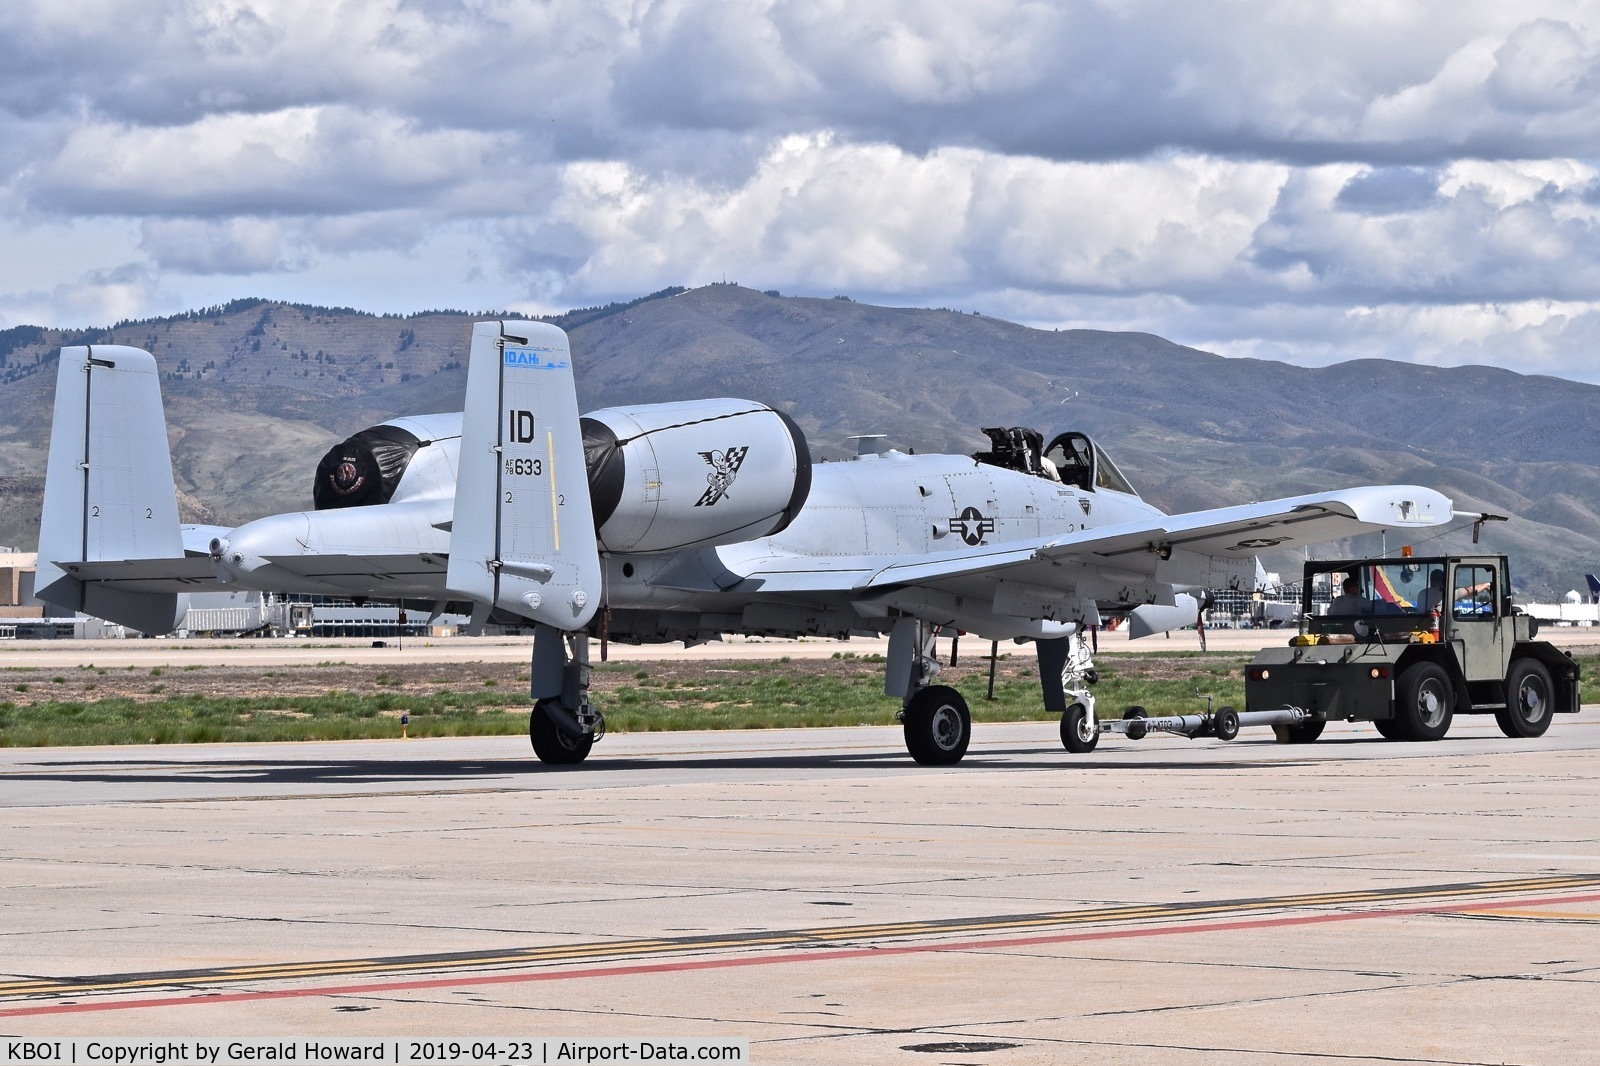 Boise Air Terminal/gowen Fld Airport (BOI) - A-10C from the Idaho ANG towed for maintenance.